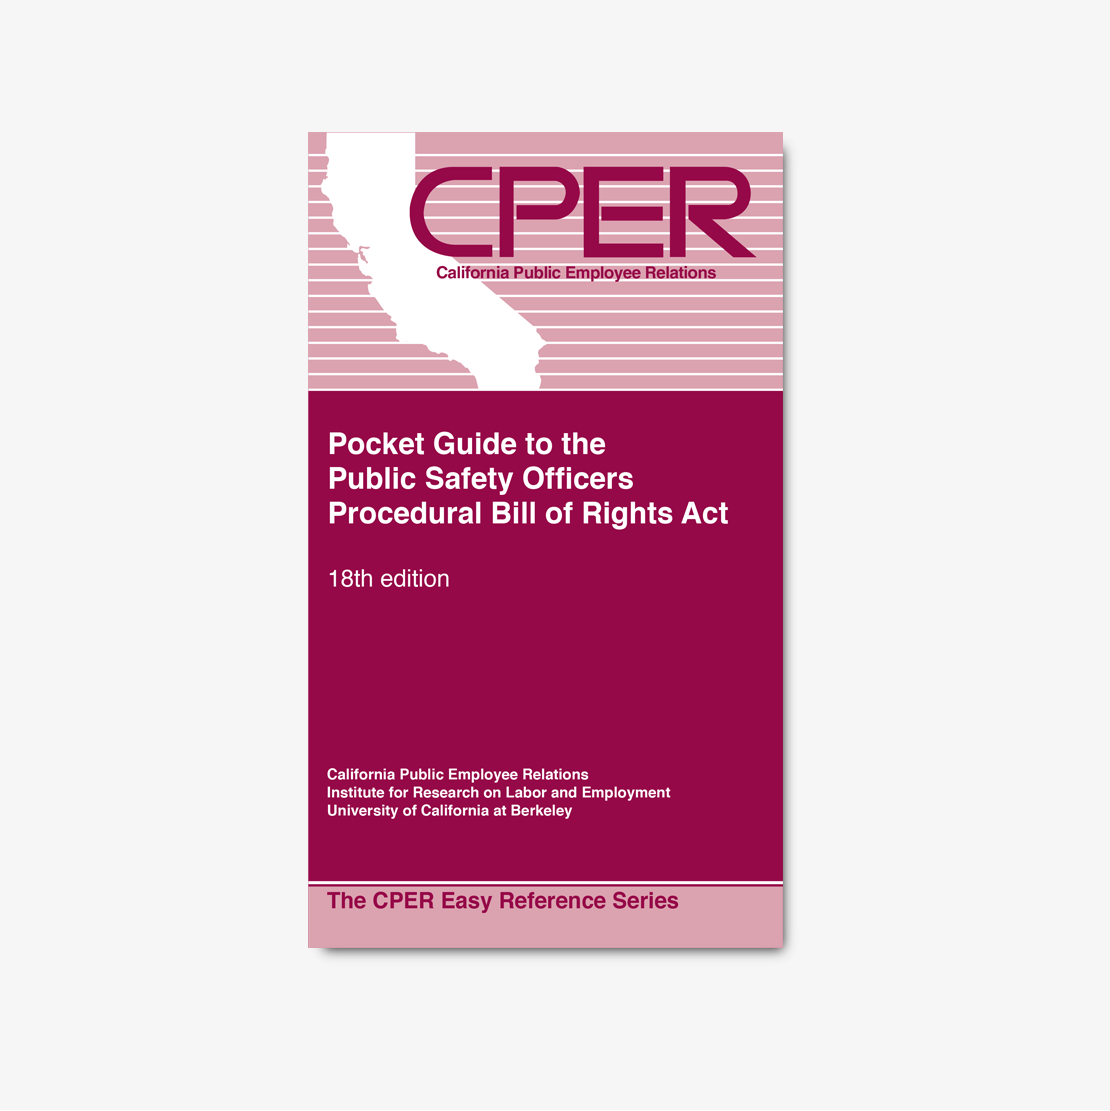 Pocket Guide to the Public Safety Officers Procedural Bill of Rights Act